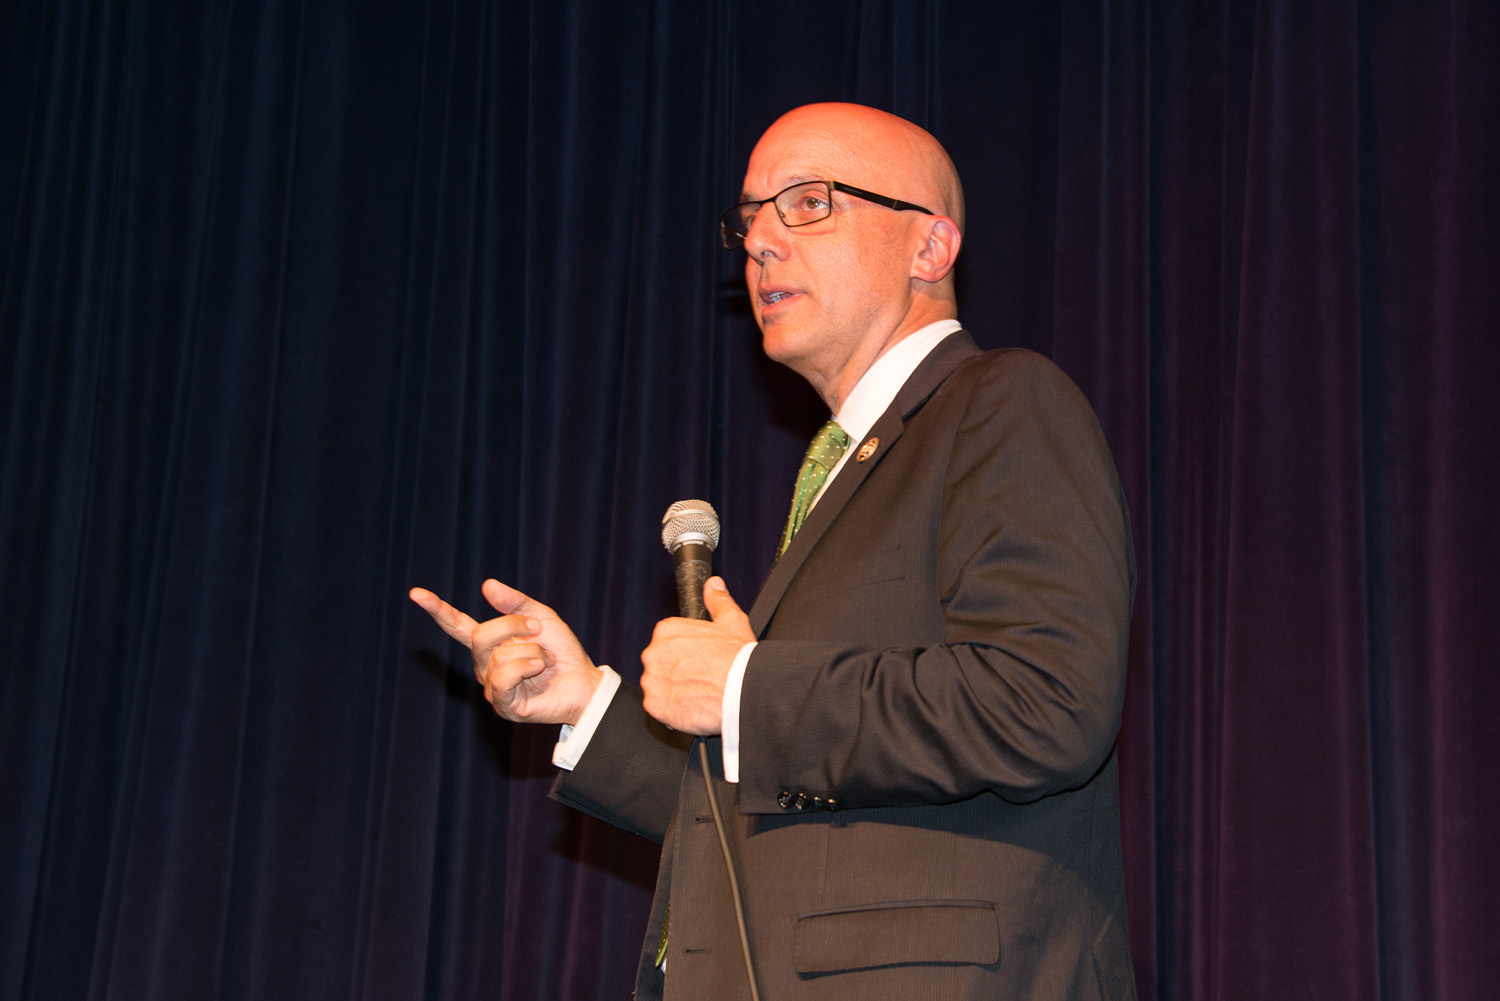 U.S. Congressman Ted Deutch announced that he opposes Iran deal at a Town Hall meeting in Coral Springs, Florida. Photo by Sharon Aron Baron